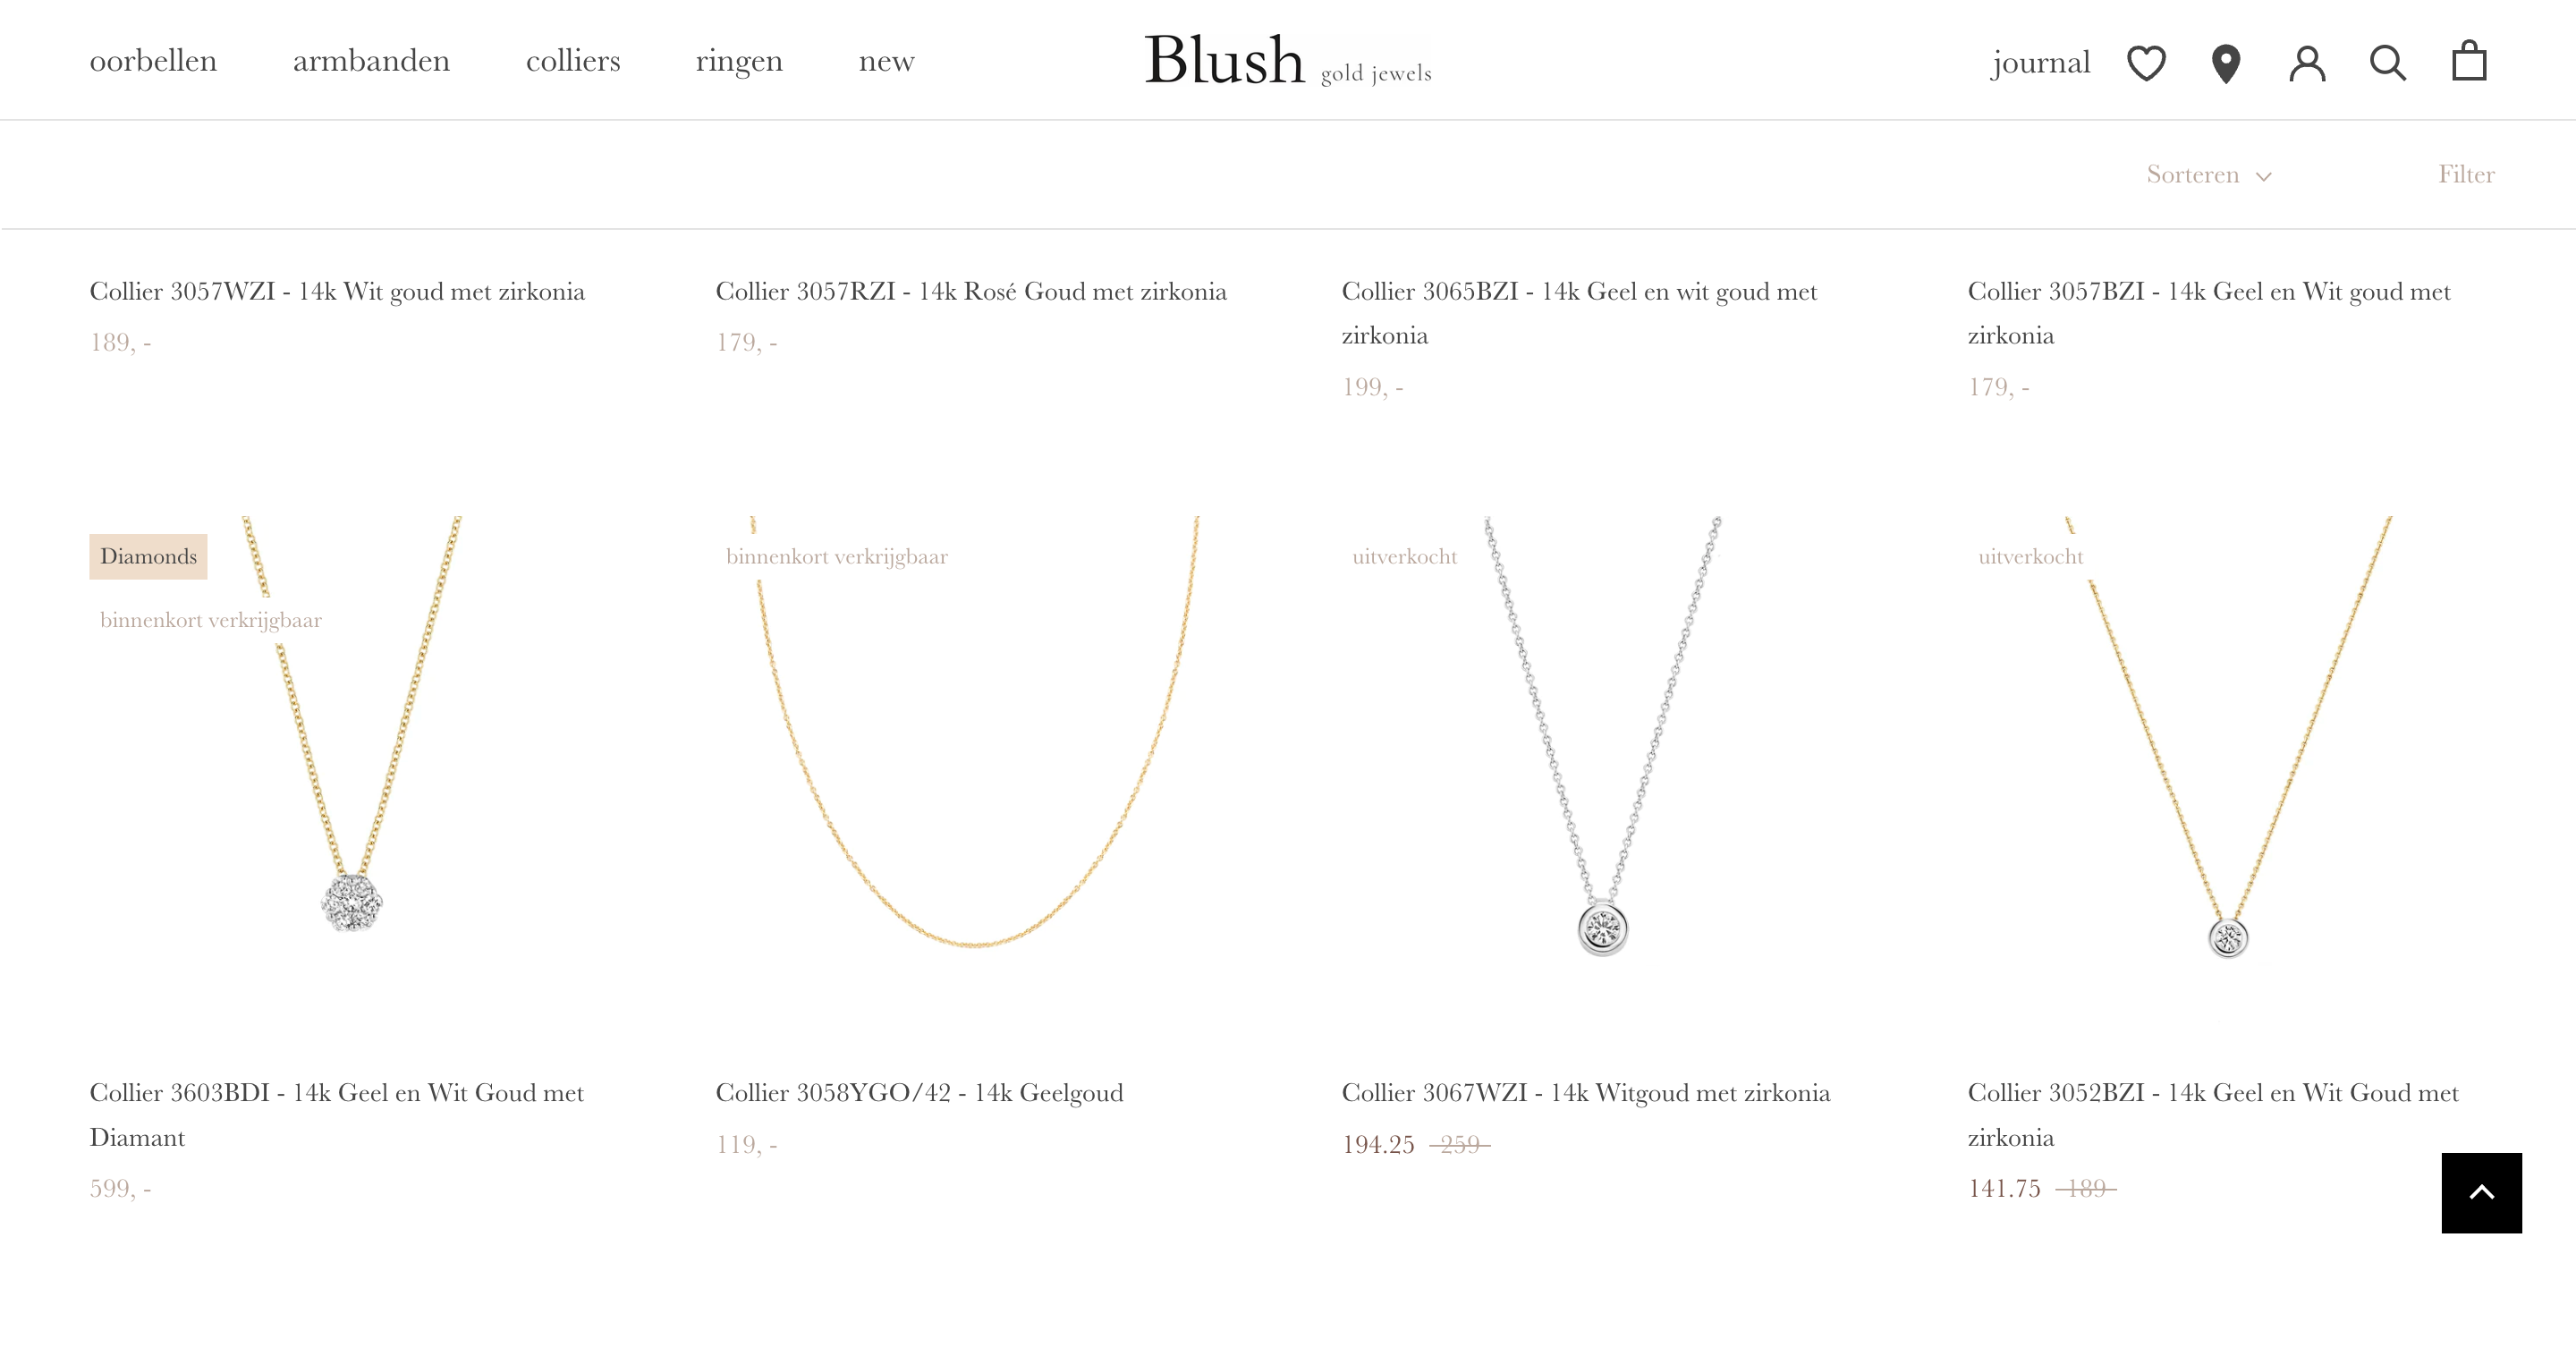 blush jewels using demoting merchandising rule of boost ai search and discovery